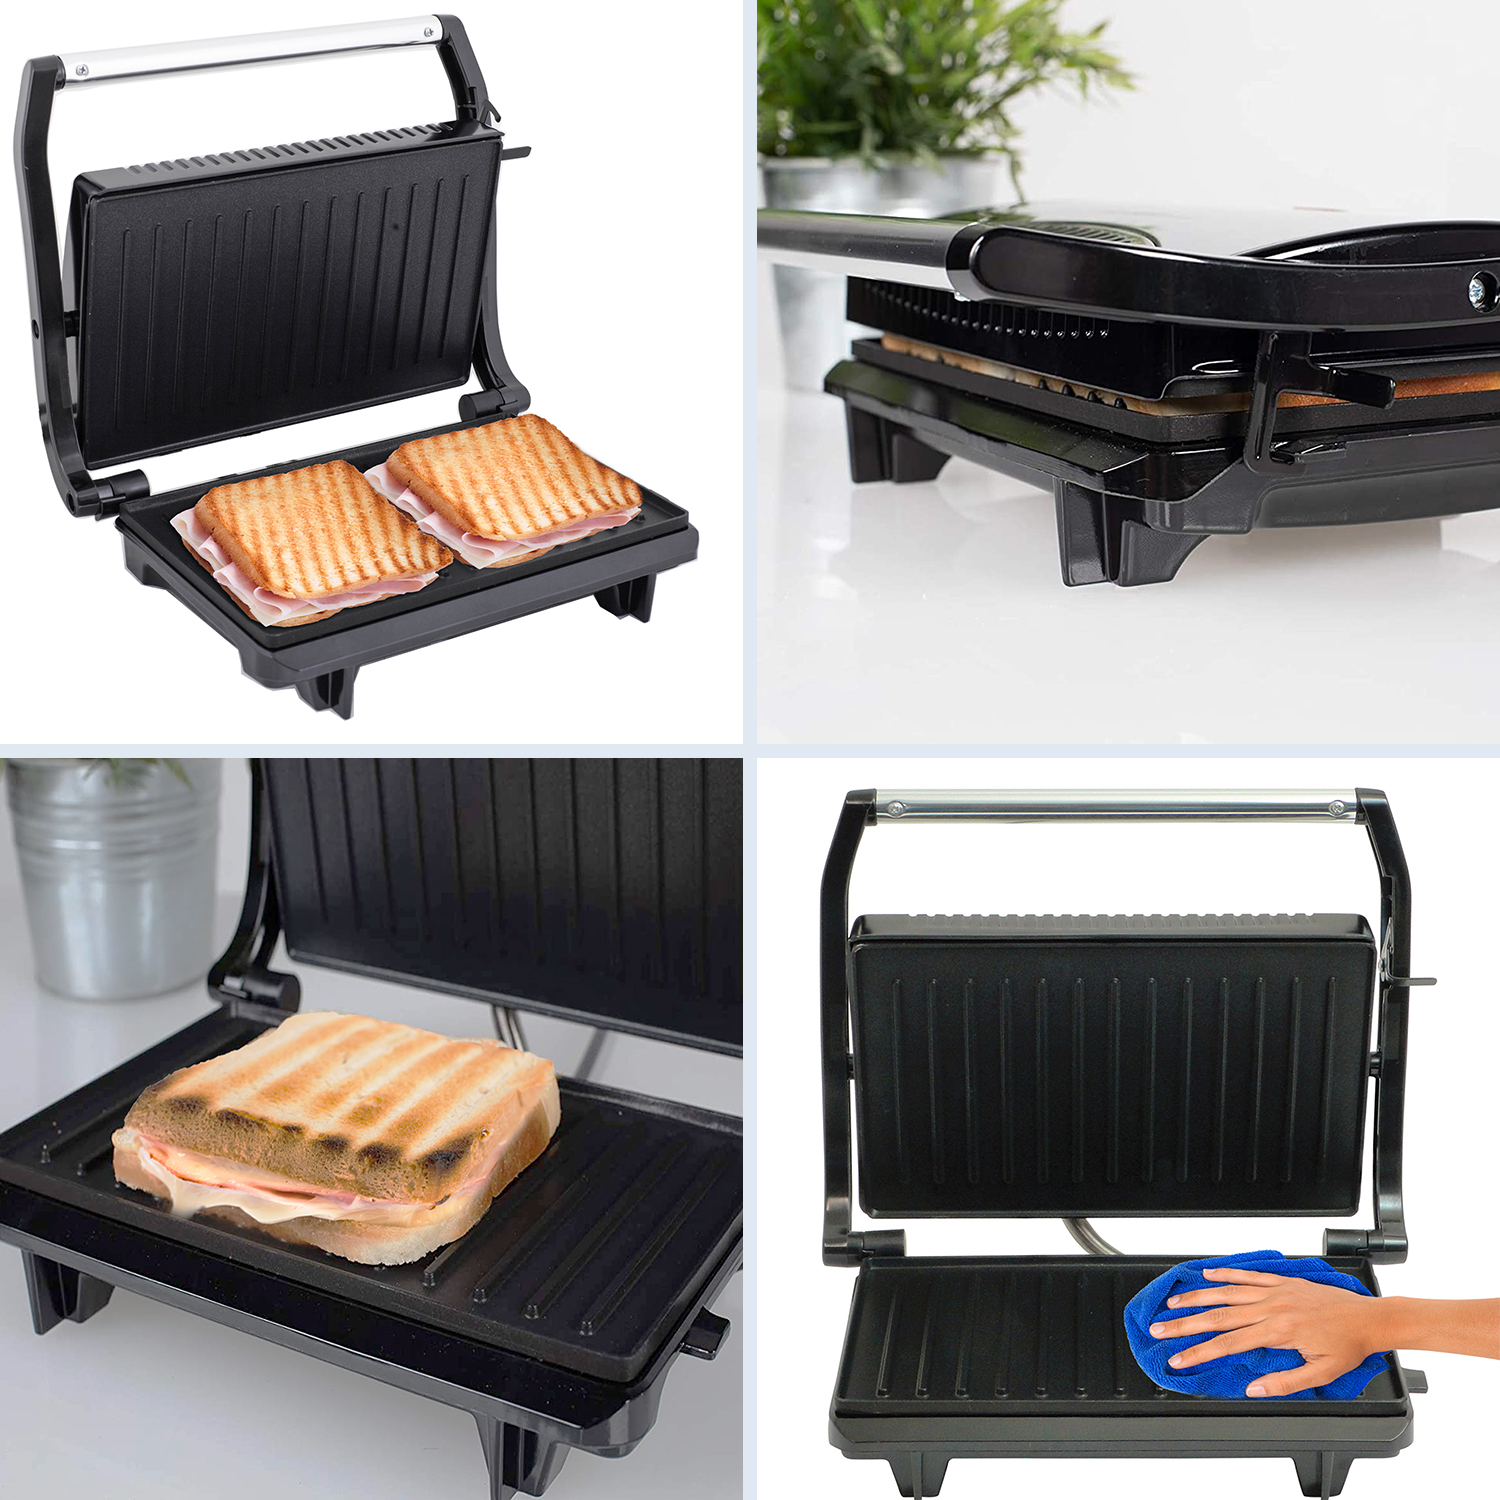 Table grill